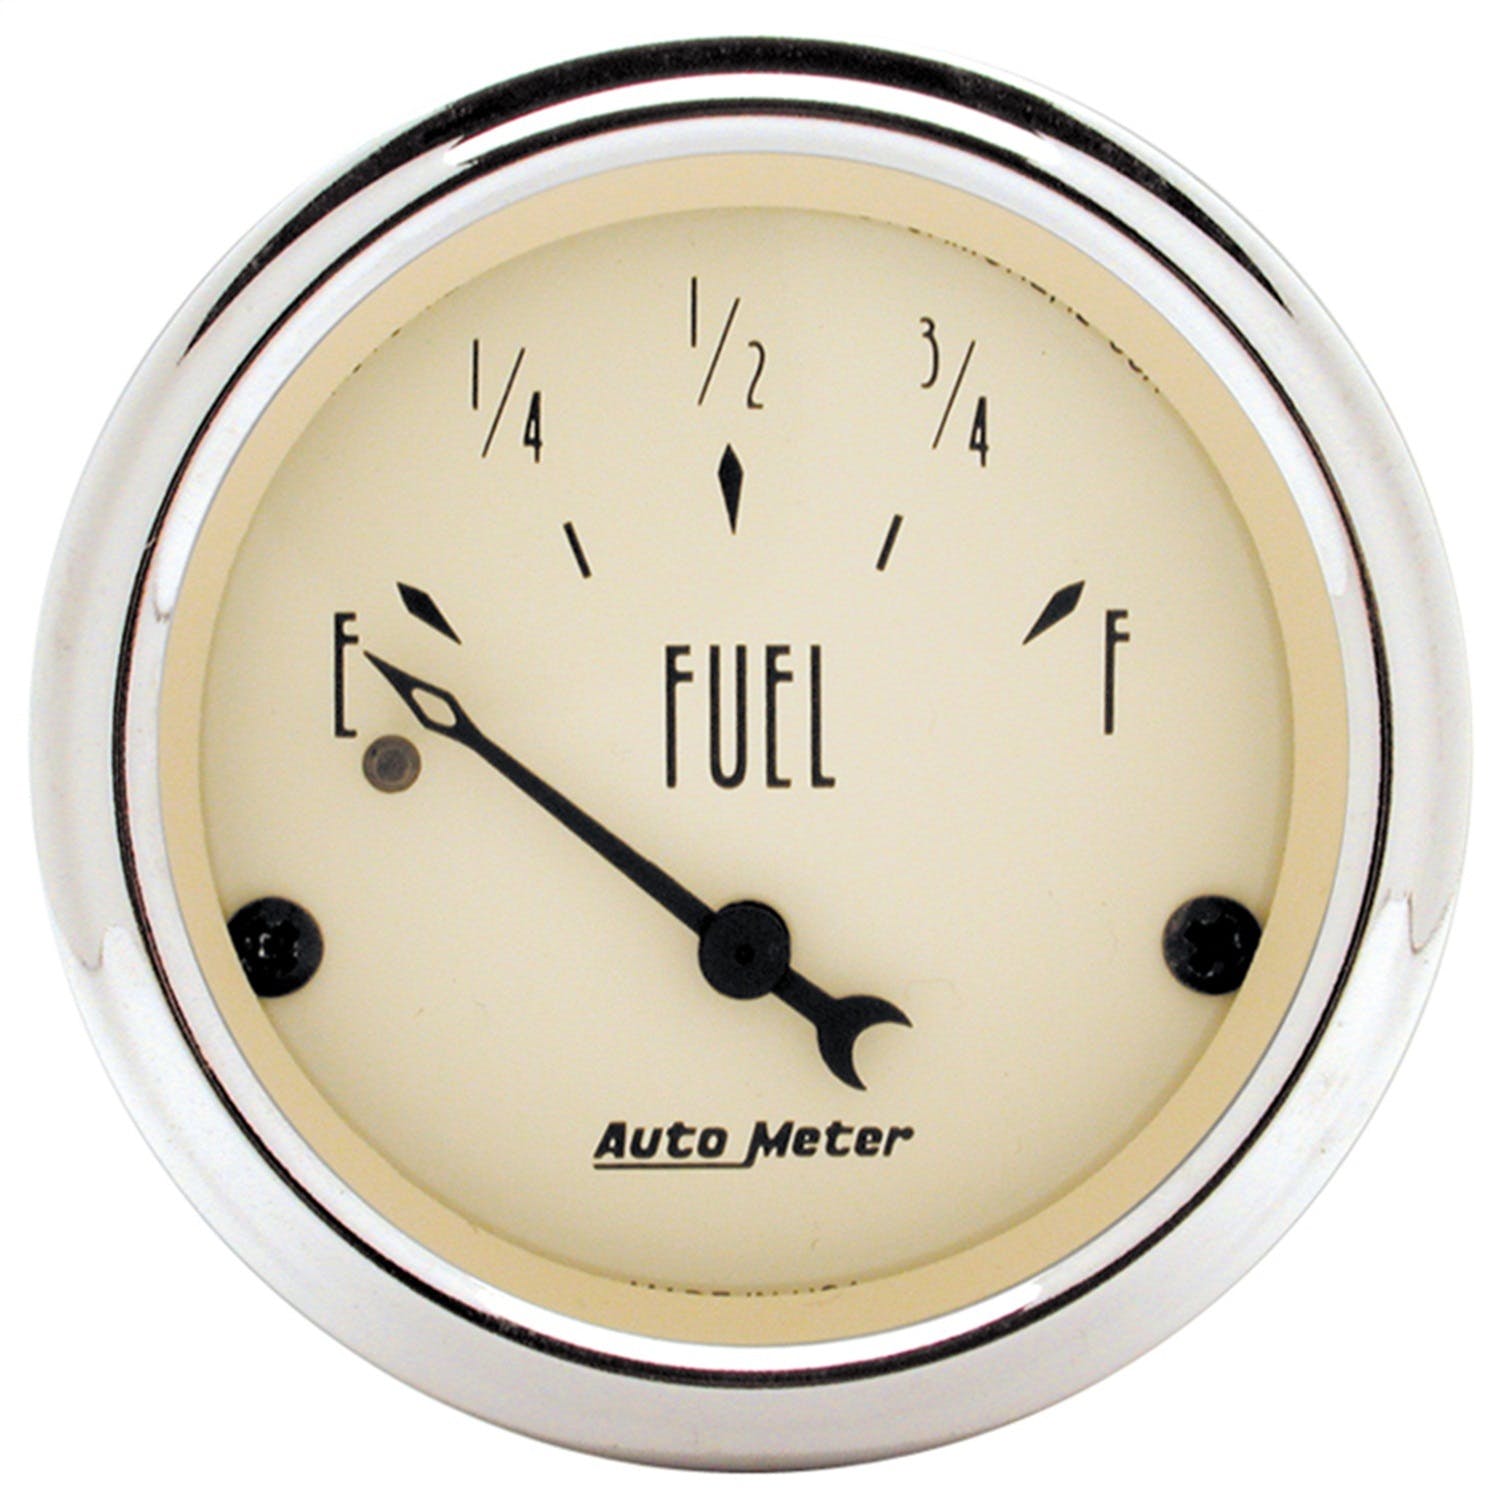 AutoMeter Products 1817 GAUGE; FUEL LEVEL; 2 1/16in.; 240 ohm E TO 33 ohm F; ELEC; ANTIQUE BEIGE